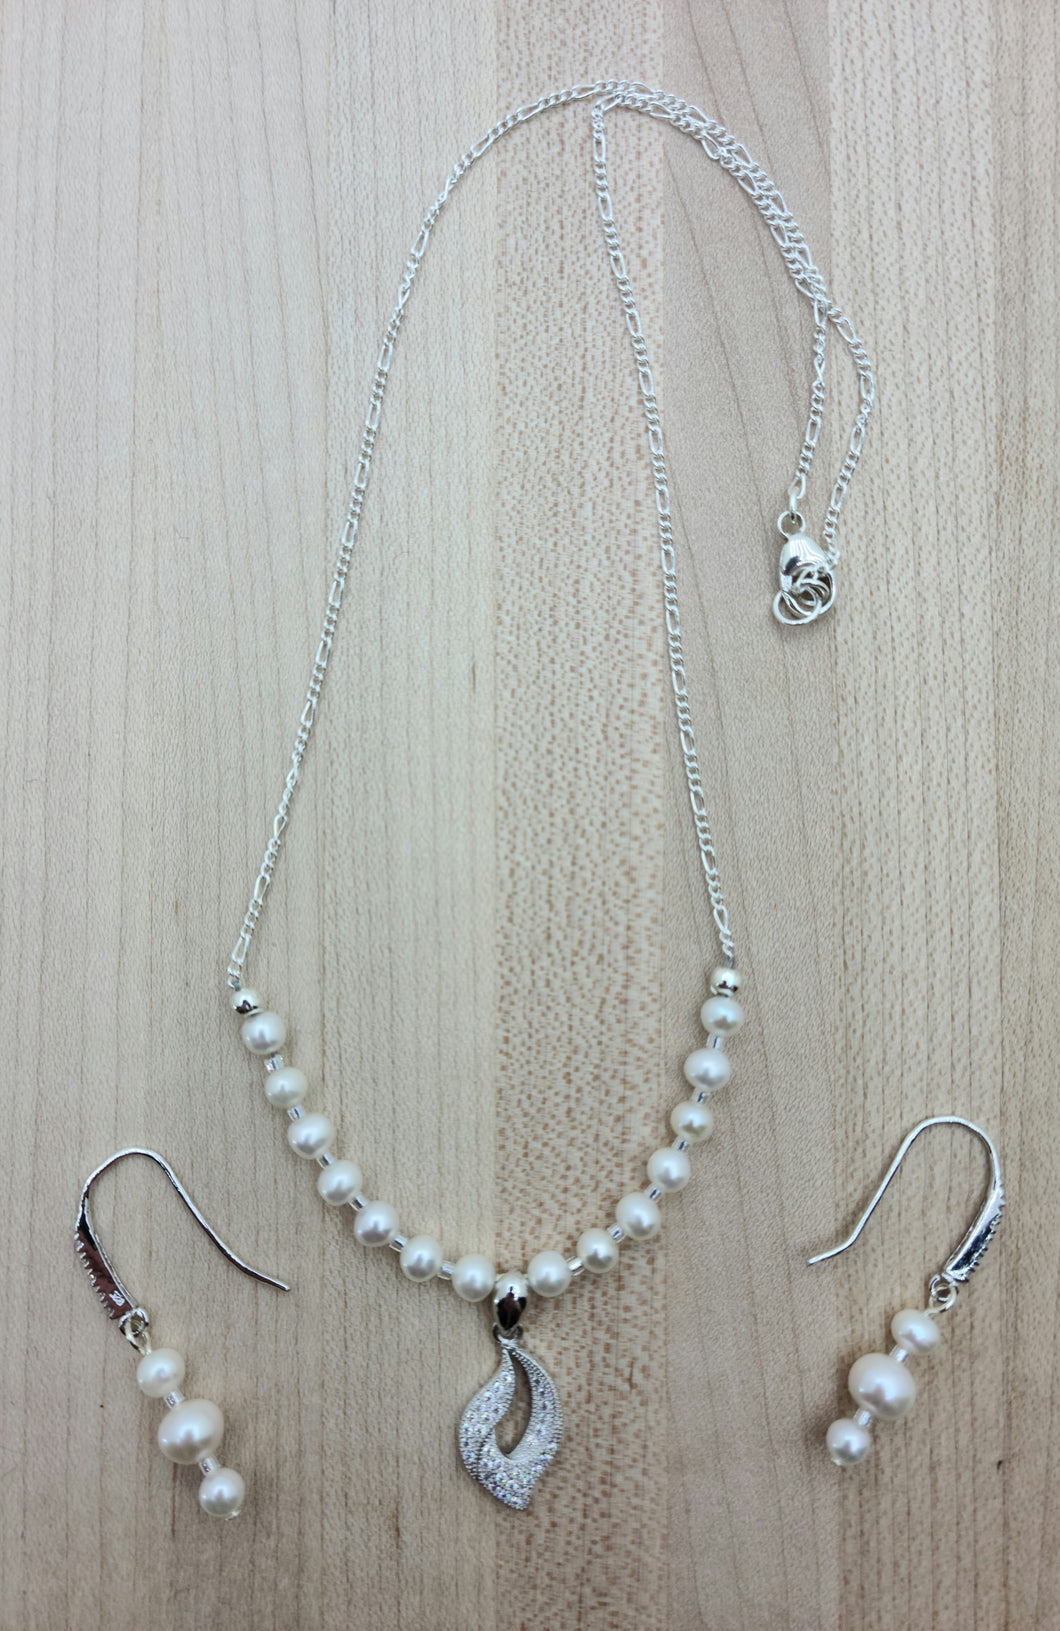 Cubic zirconia encrusted delicate drop, White Freshwater Pearls, Miyuki delica, Sterling Silver.  Wedding perfect jewelry!